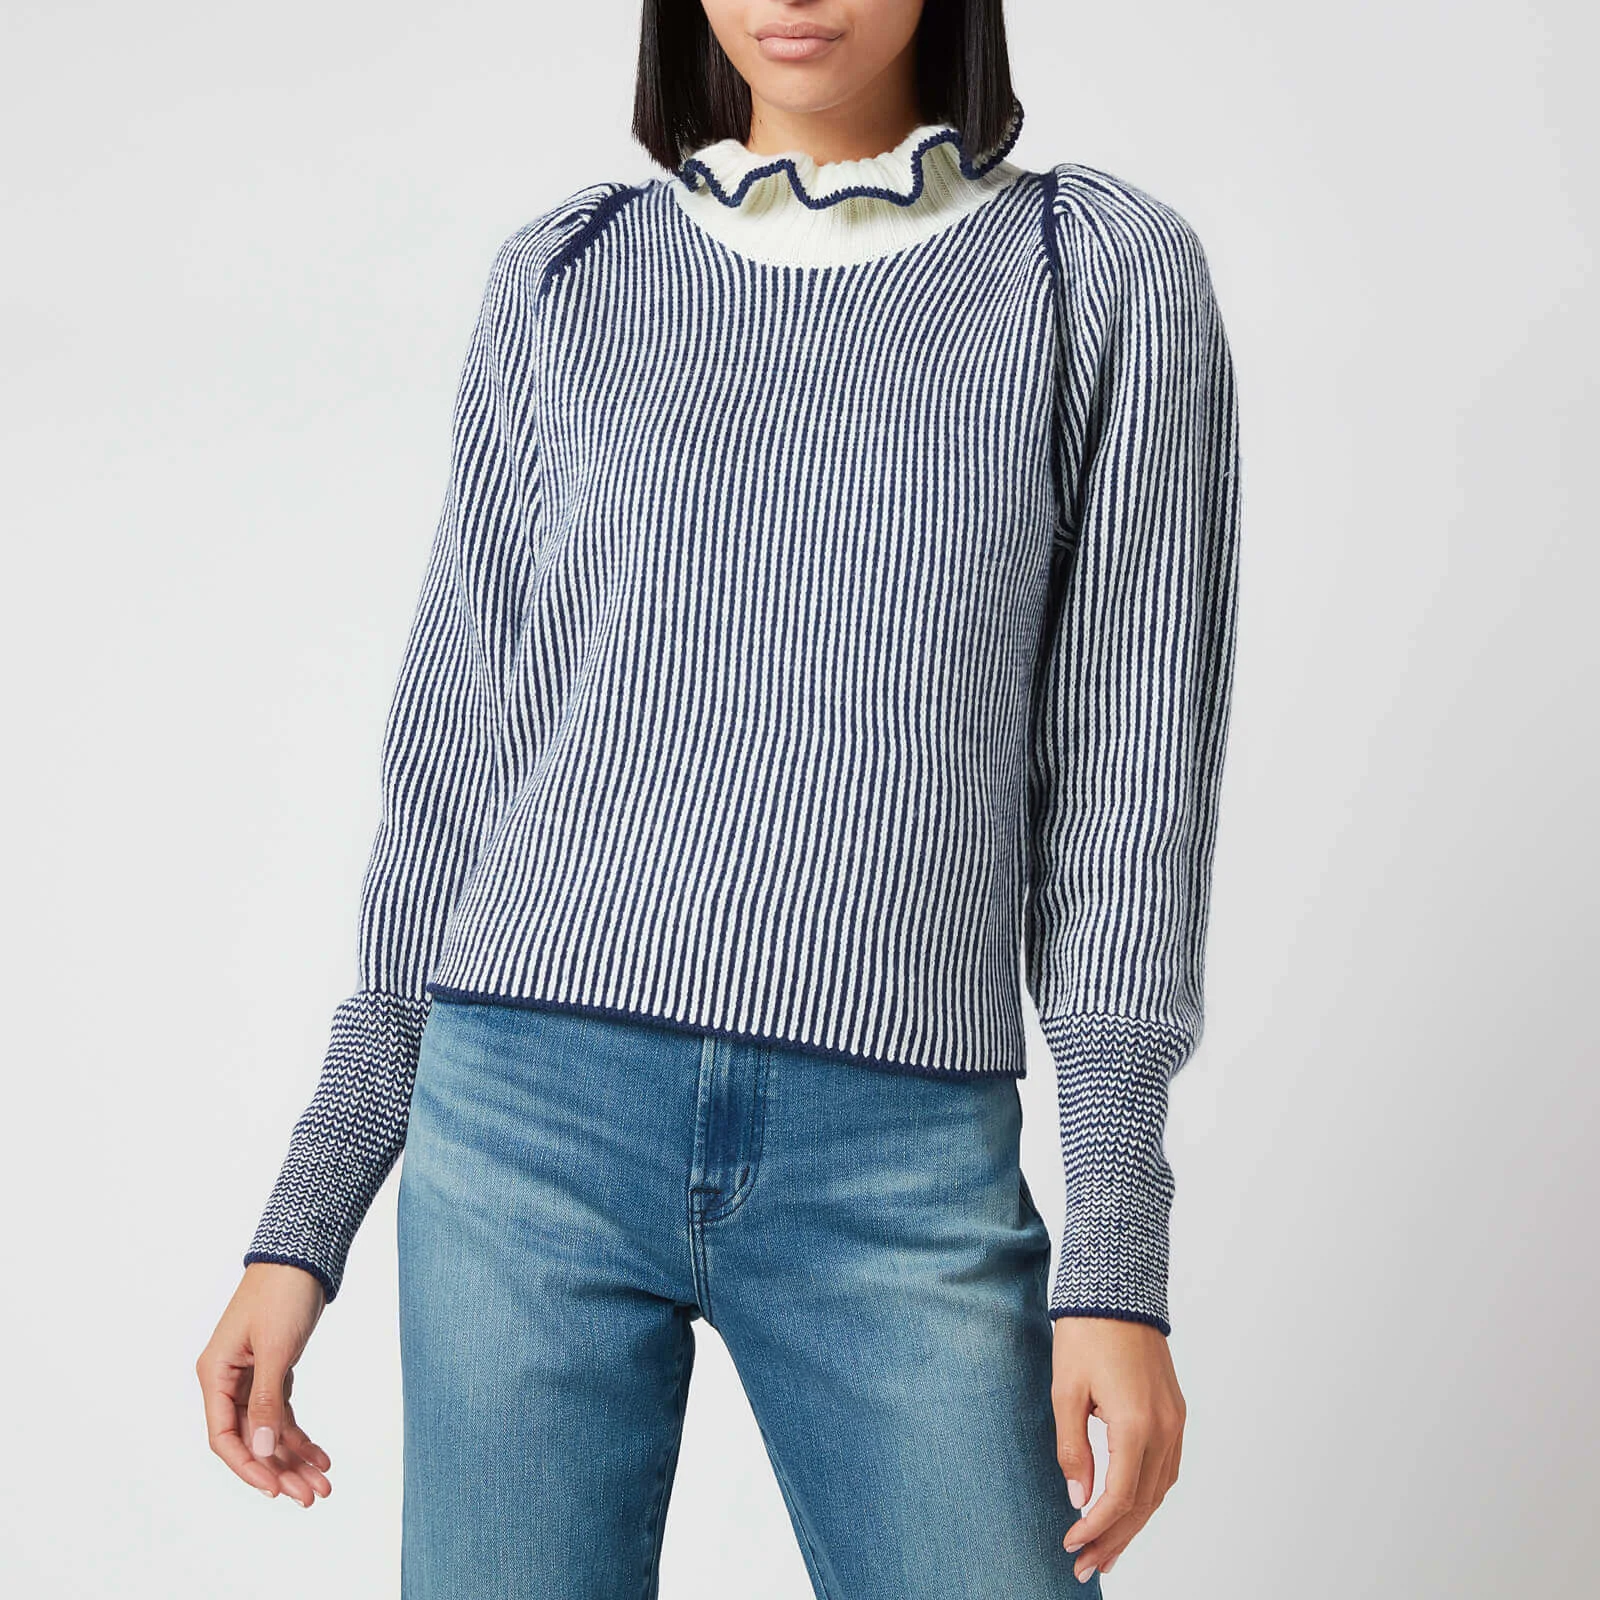 See by Chloé Women's High Frill Neck Jumper - Blue White Image 1